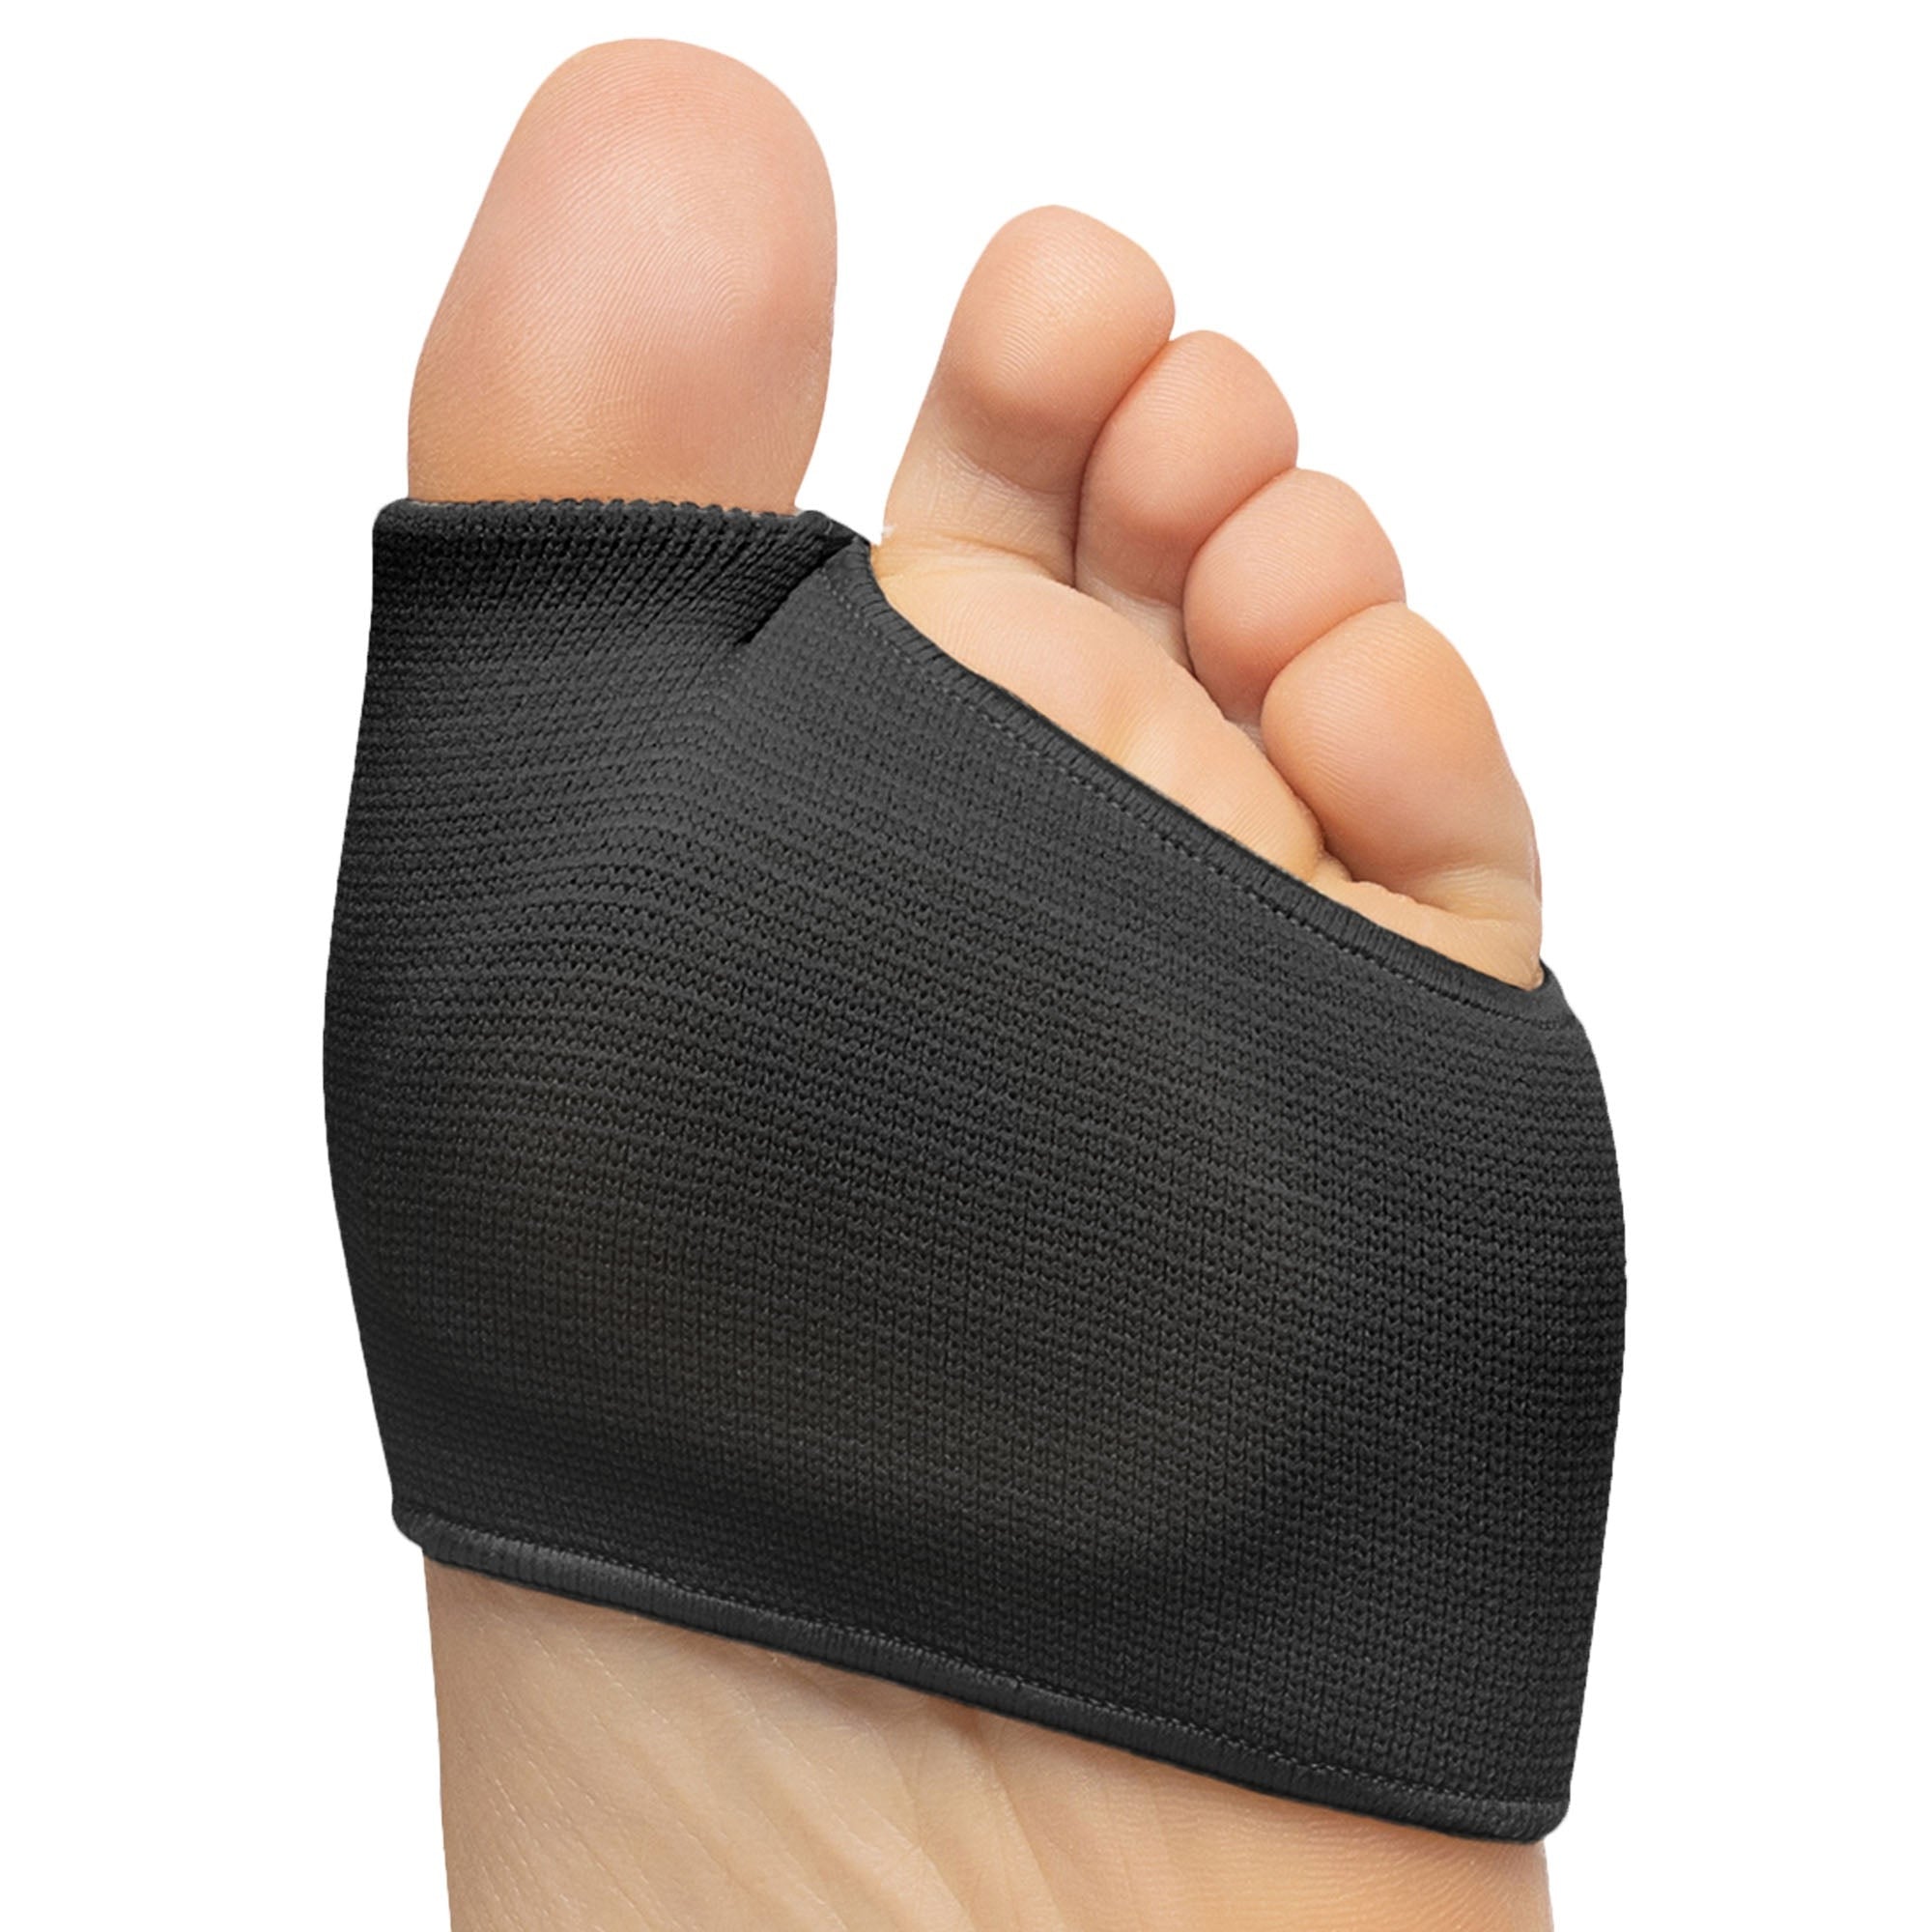 ZenToes Fabric Metatarsal Sleeve with Gel Pad Cushions Ball of Foot Black / Large